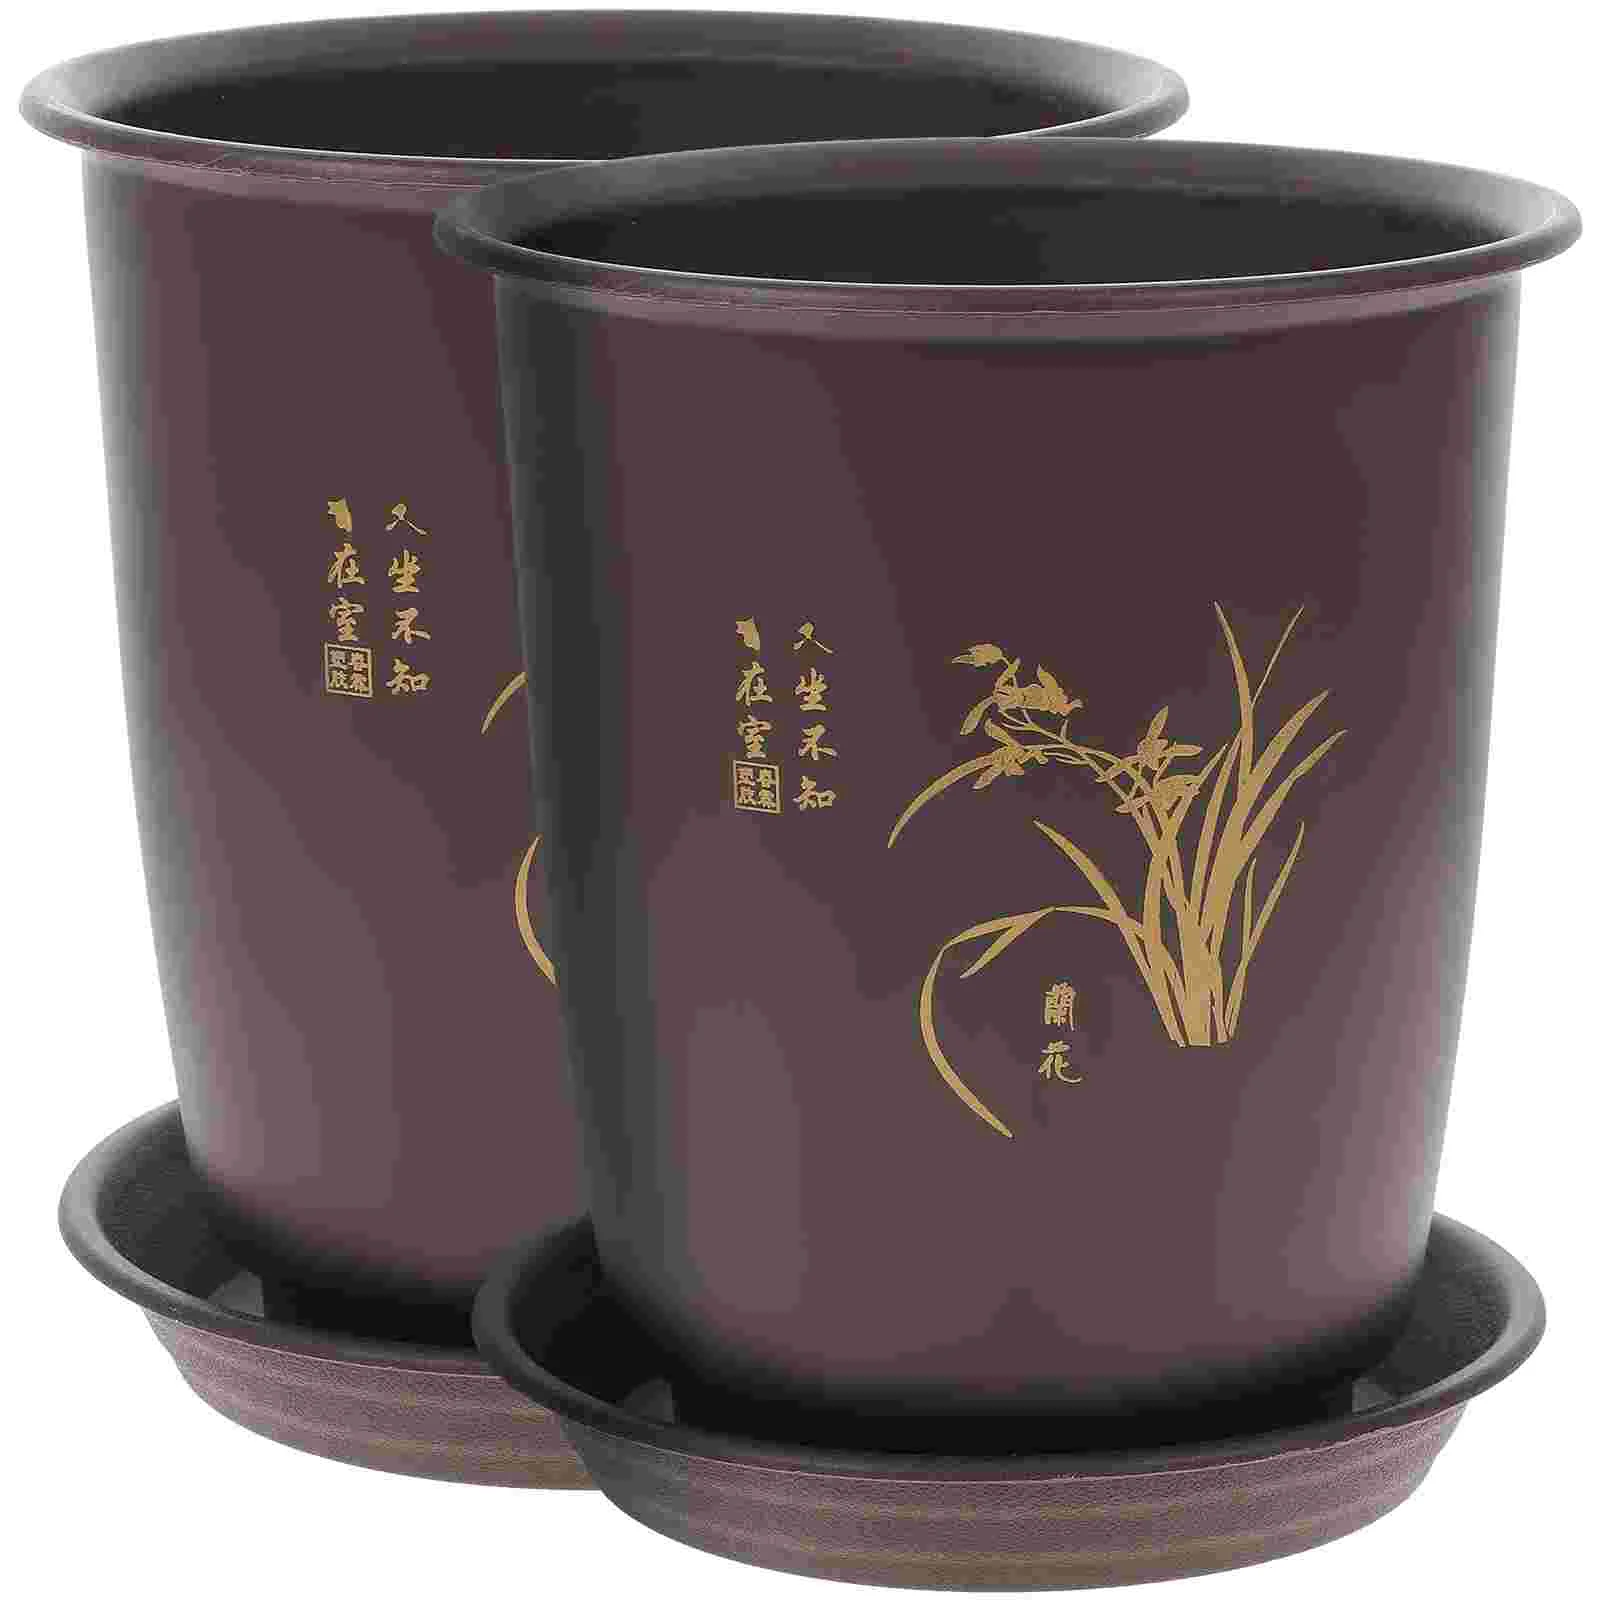 

Nursery Flower Pots 2 Sets Tall Flower Container Nursery Pots Orchid Pots Orchid Planter with Trays